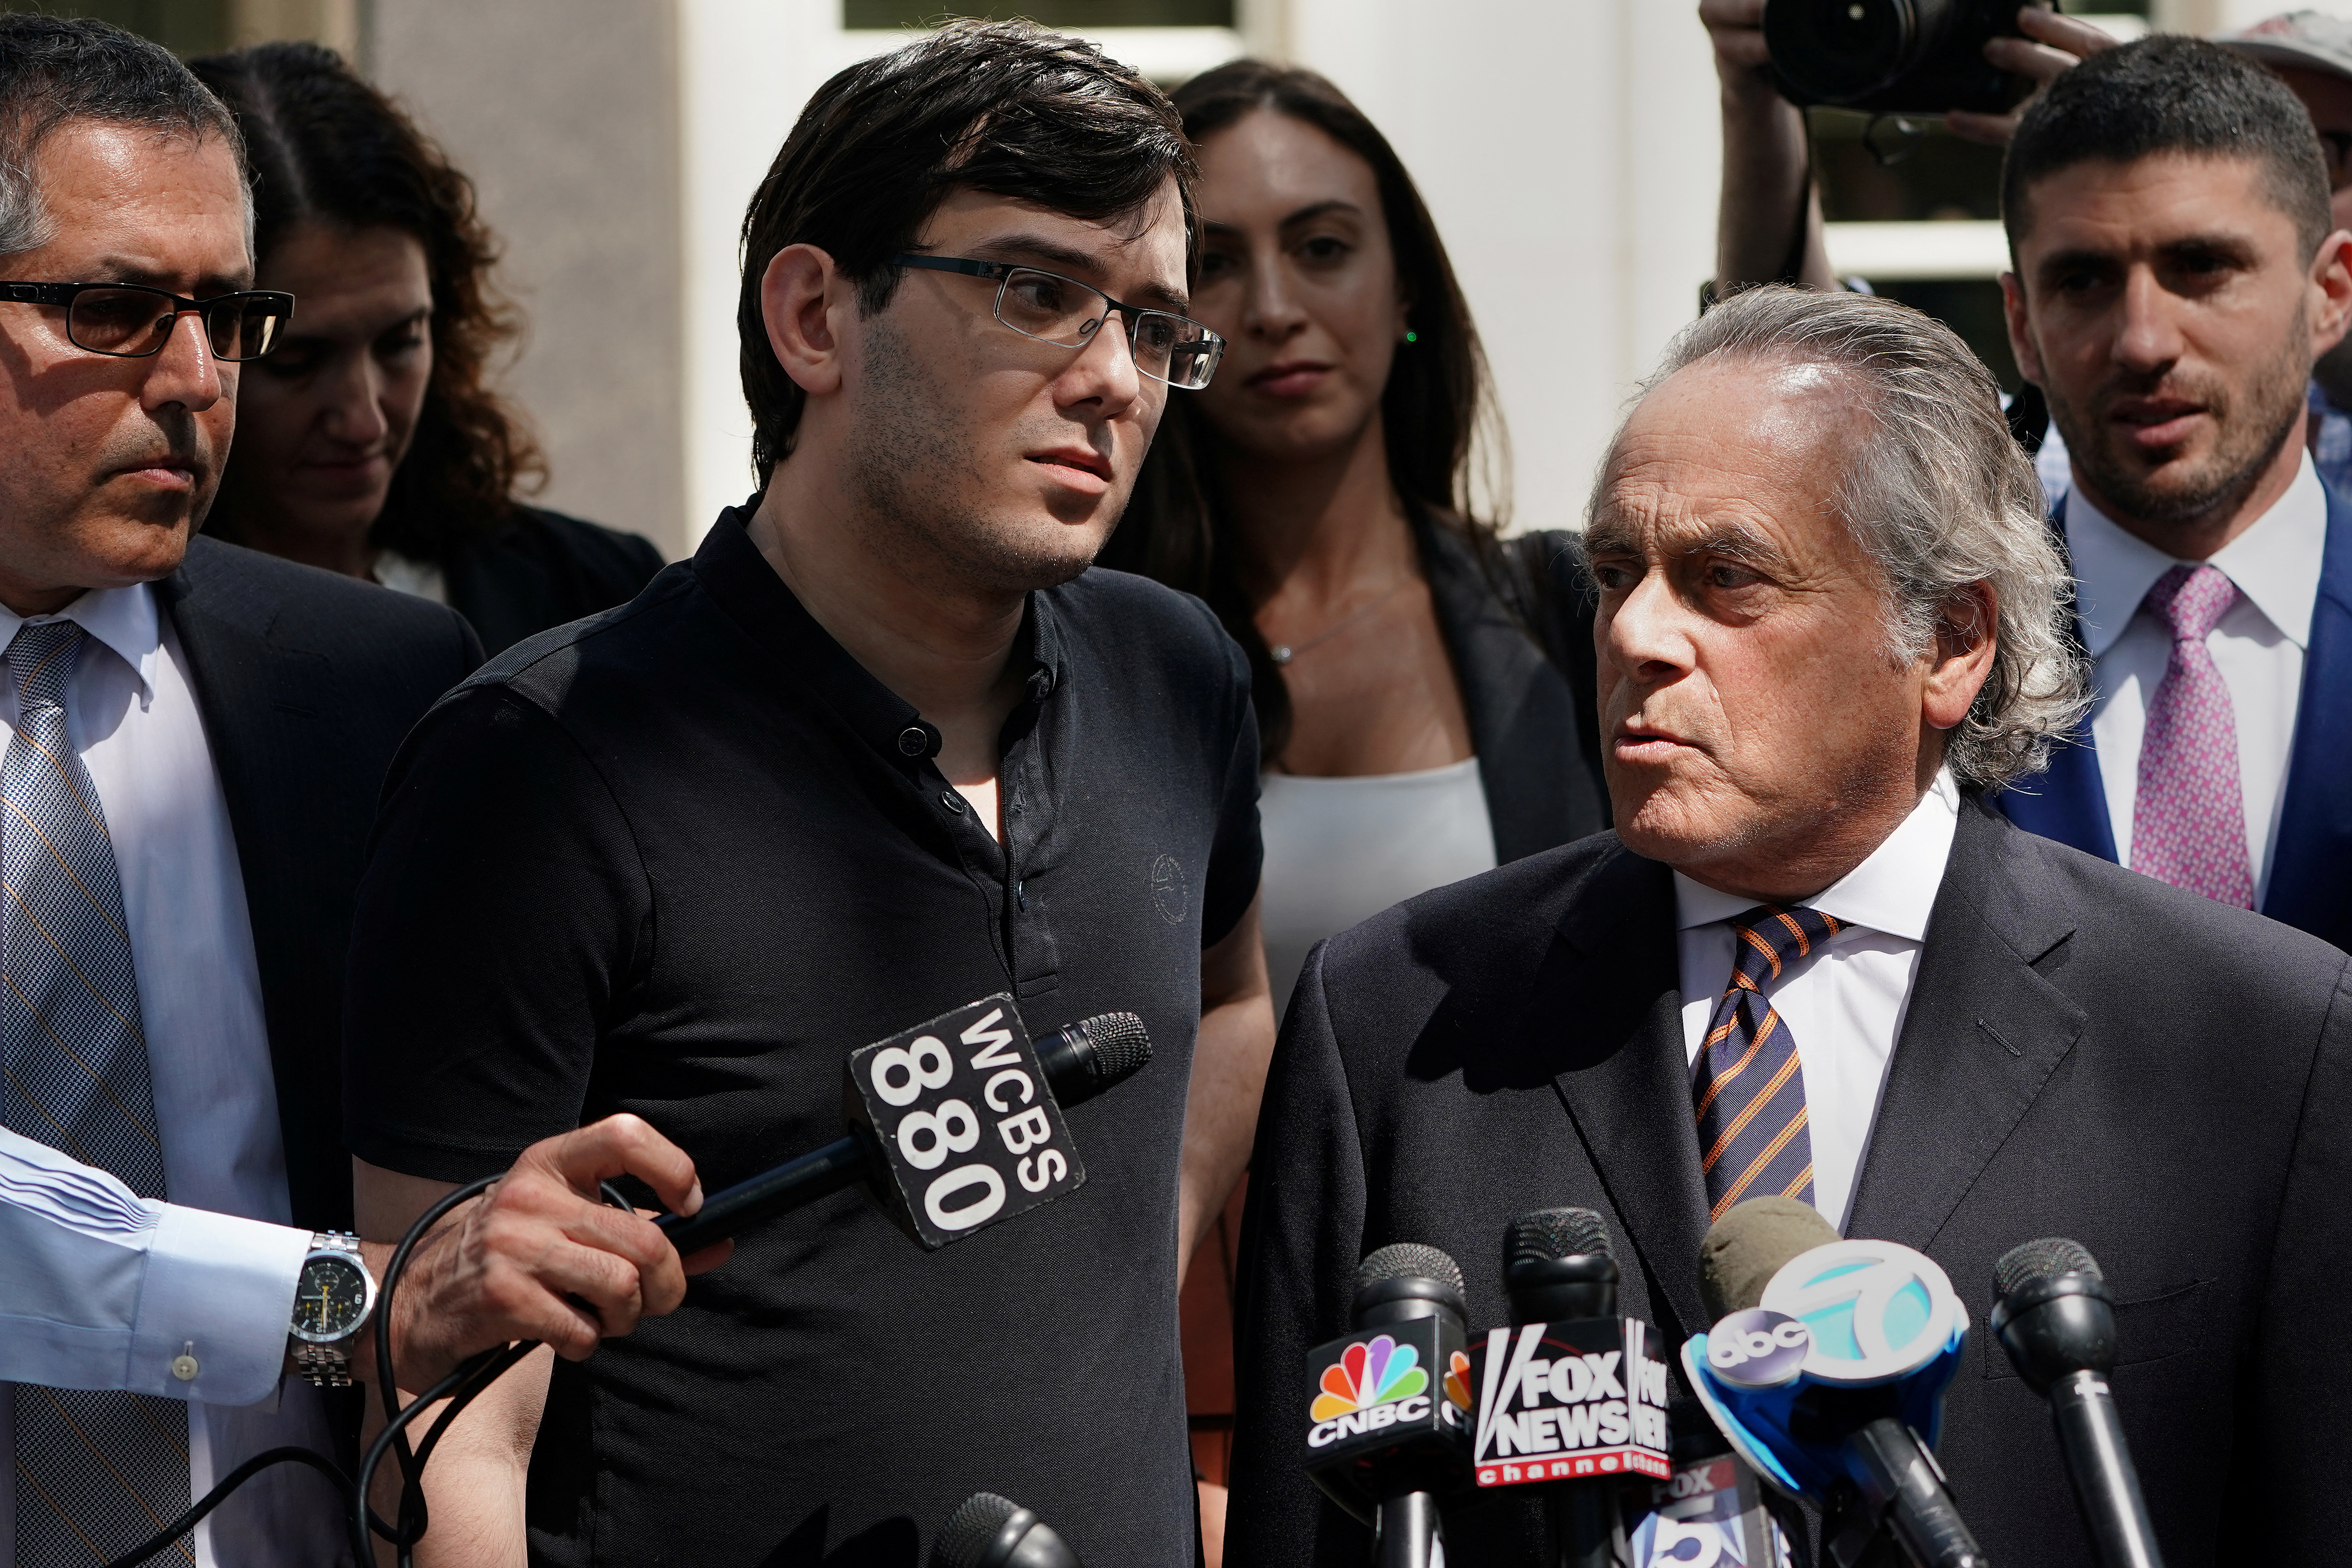 Former drug company executive Martin Shkreli stands with his attorney Benjamin Brafman after exiting U.S. District Court upon being convicted of securities fraud, in the Brooklyn borough of New York City, U.S., August 4, 2017. REUTERS/Carlo Allegri